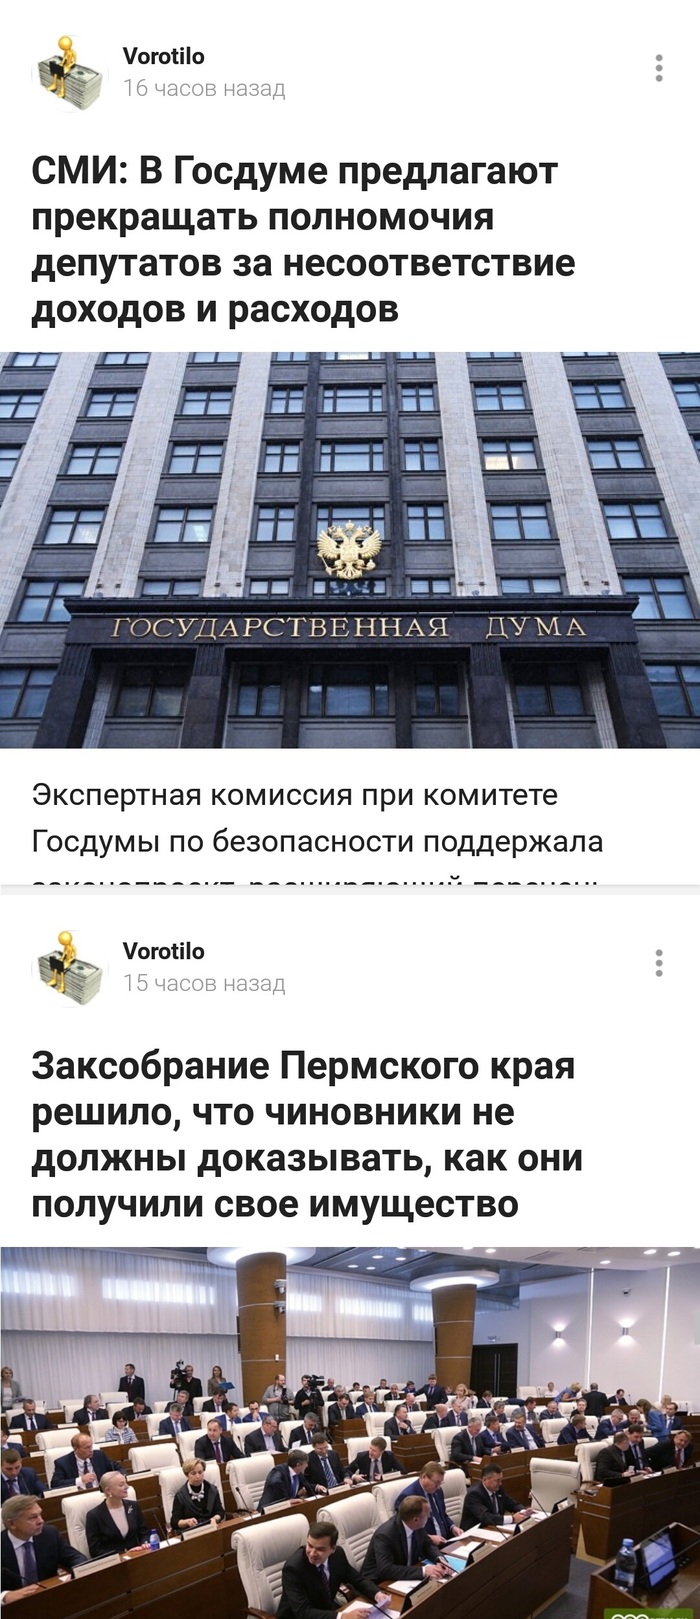 While the State Duma is thinking, Perm has already secured itself - Humor, My, Longpost, Coincidence, Law